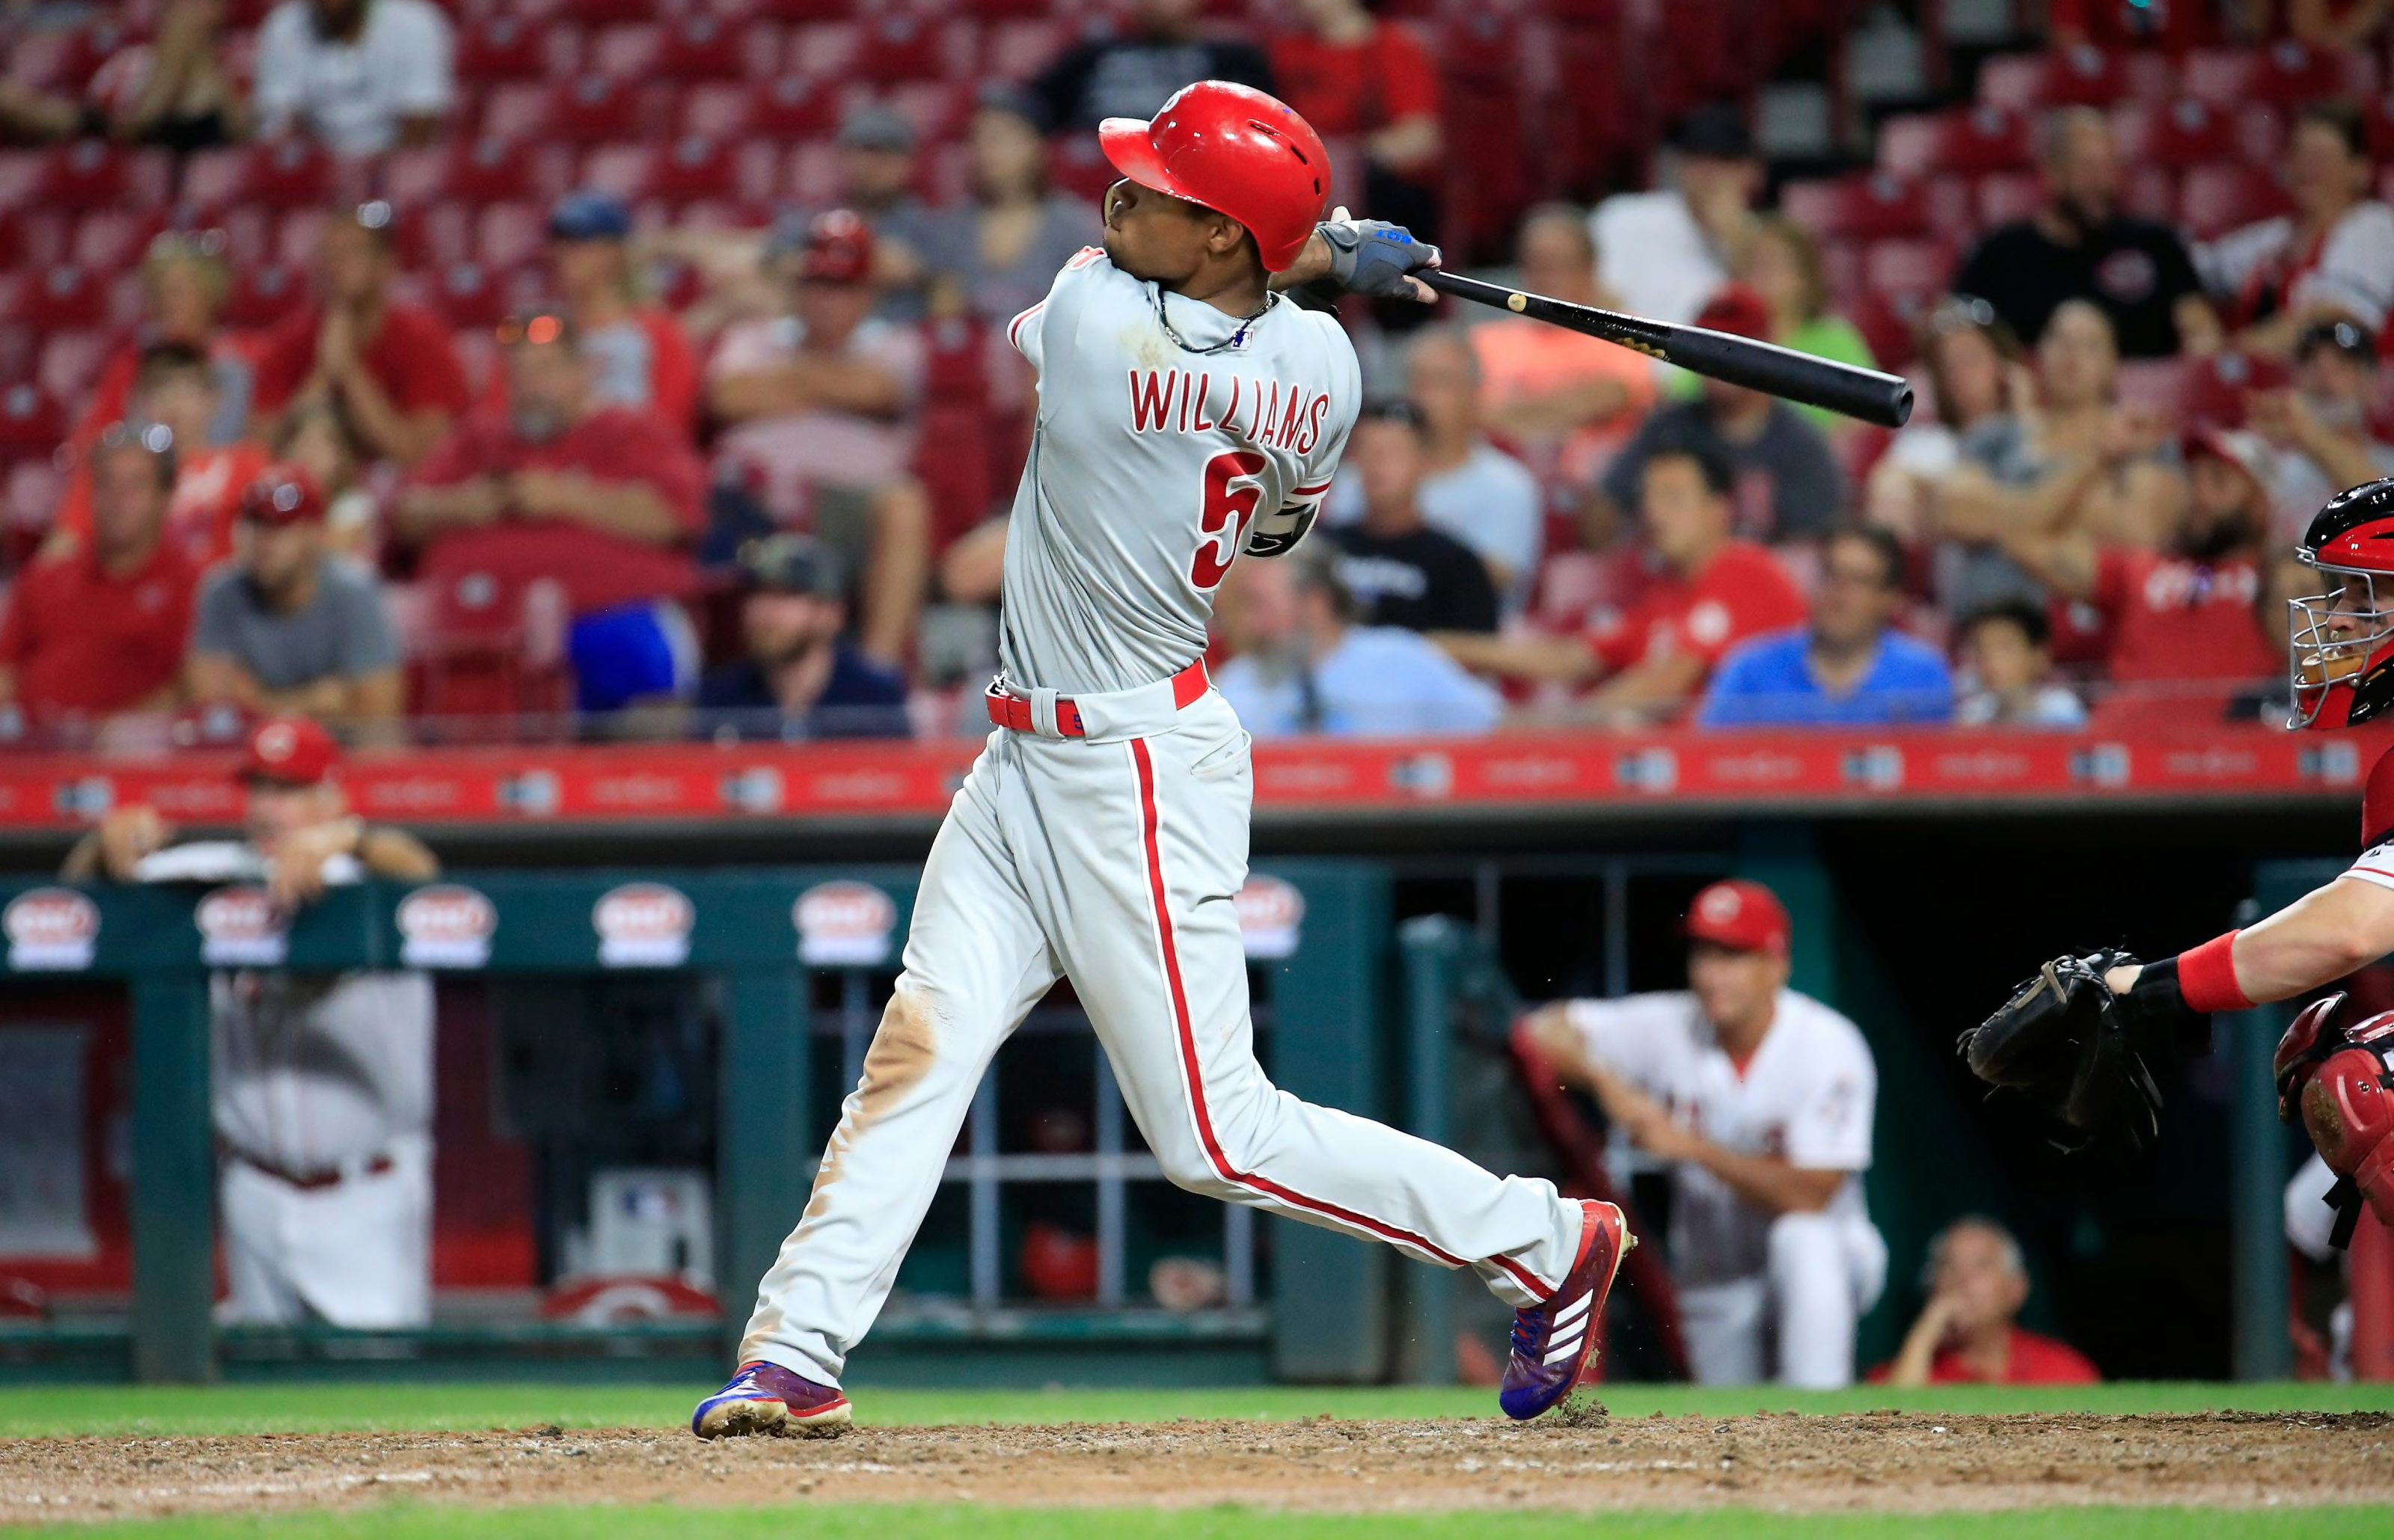 Phillies: Potential DH options if new rules are enacted - Page 3